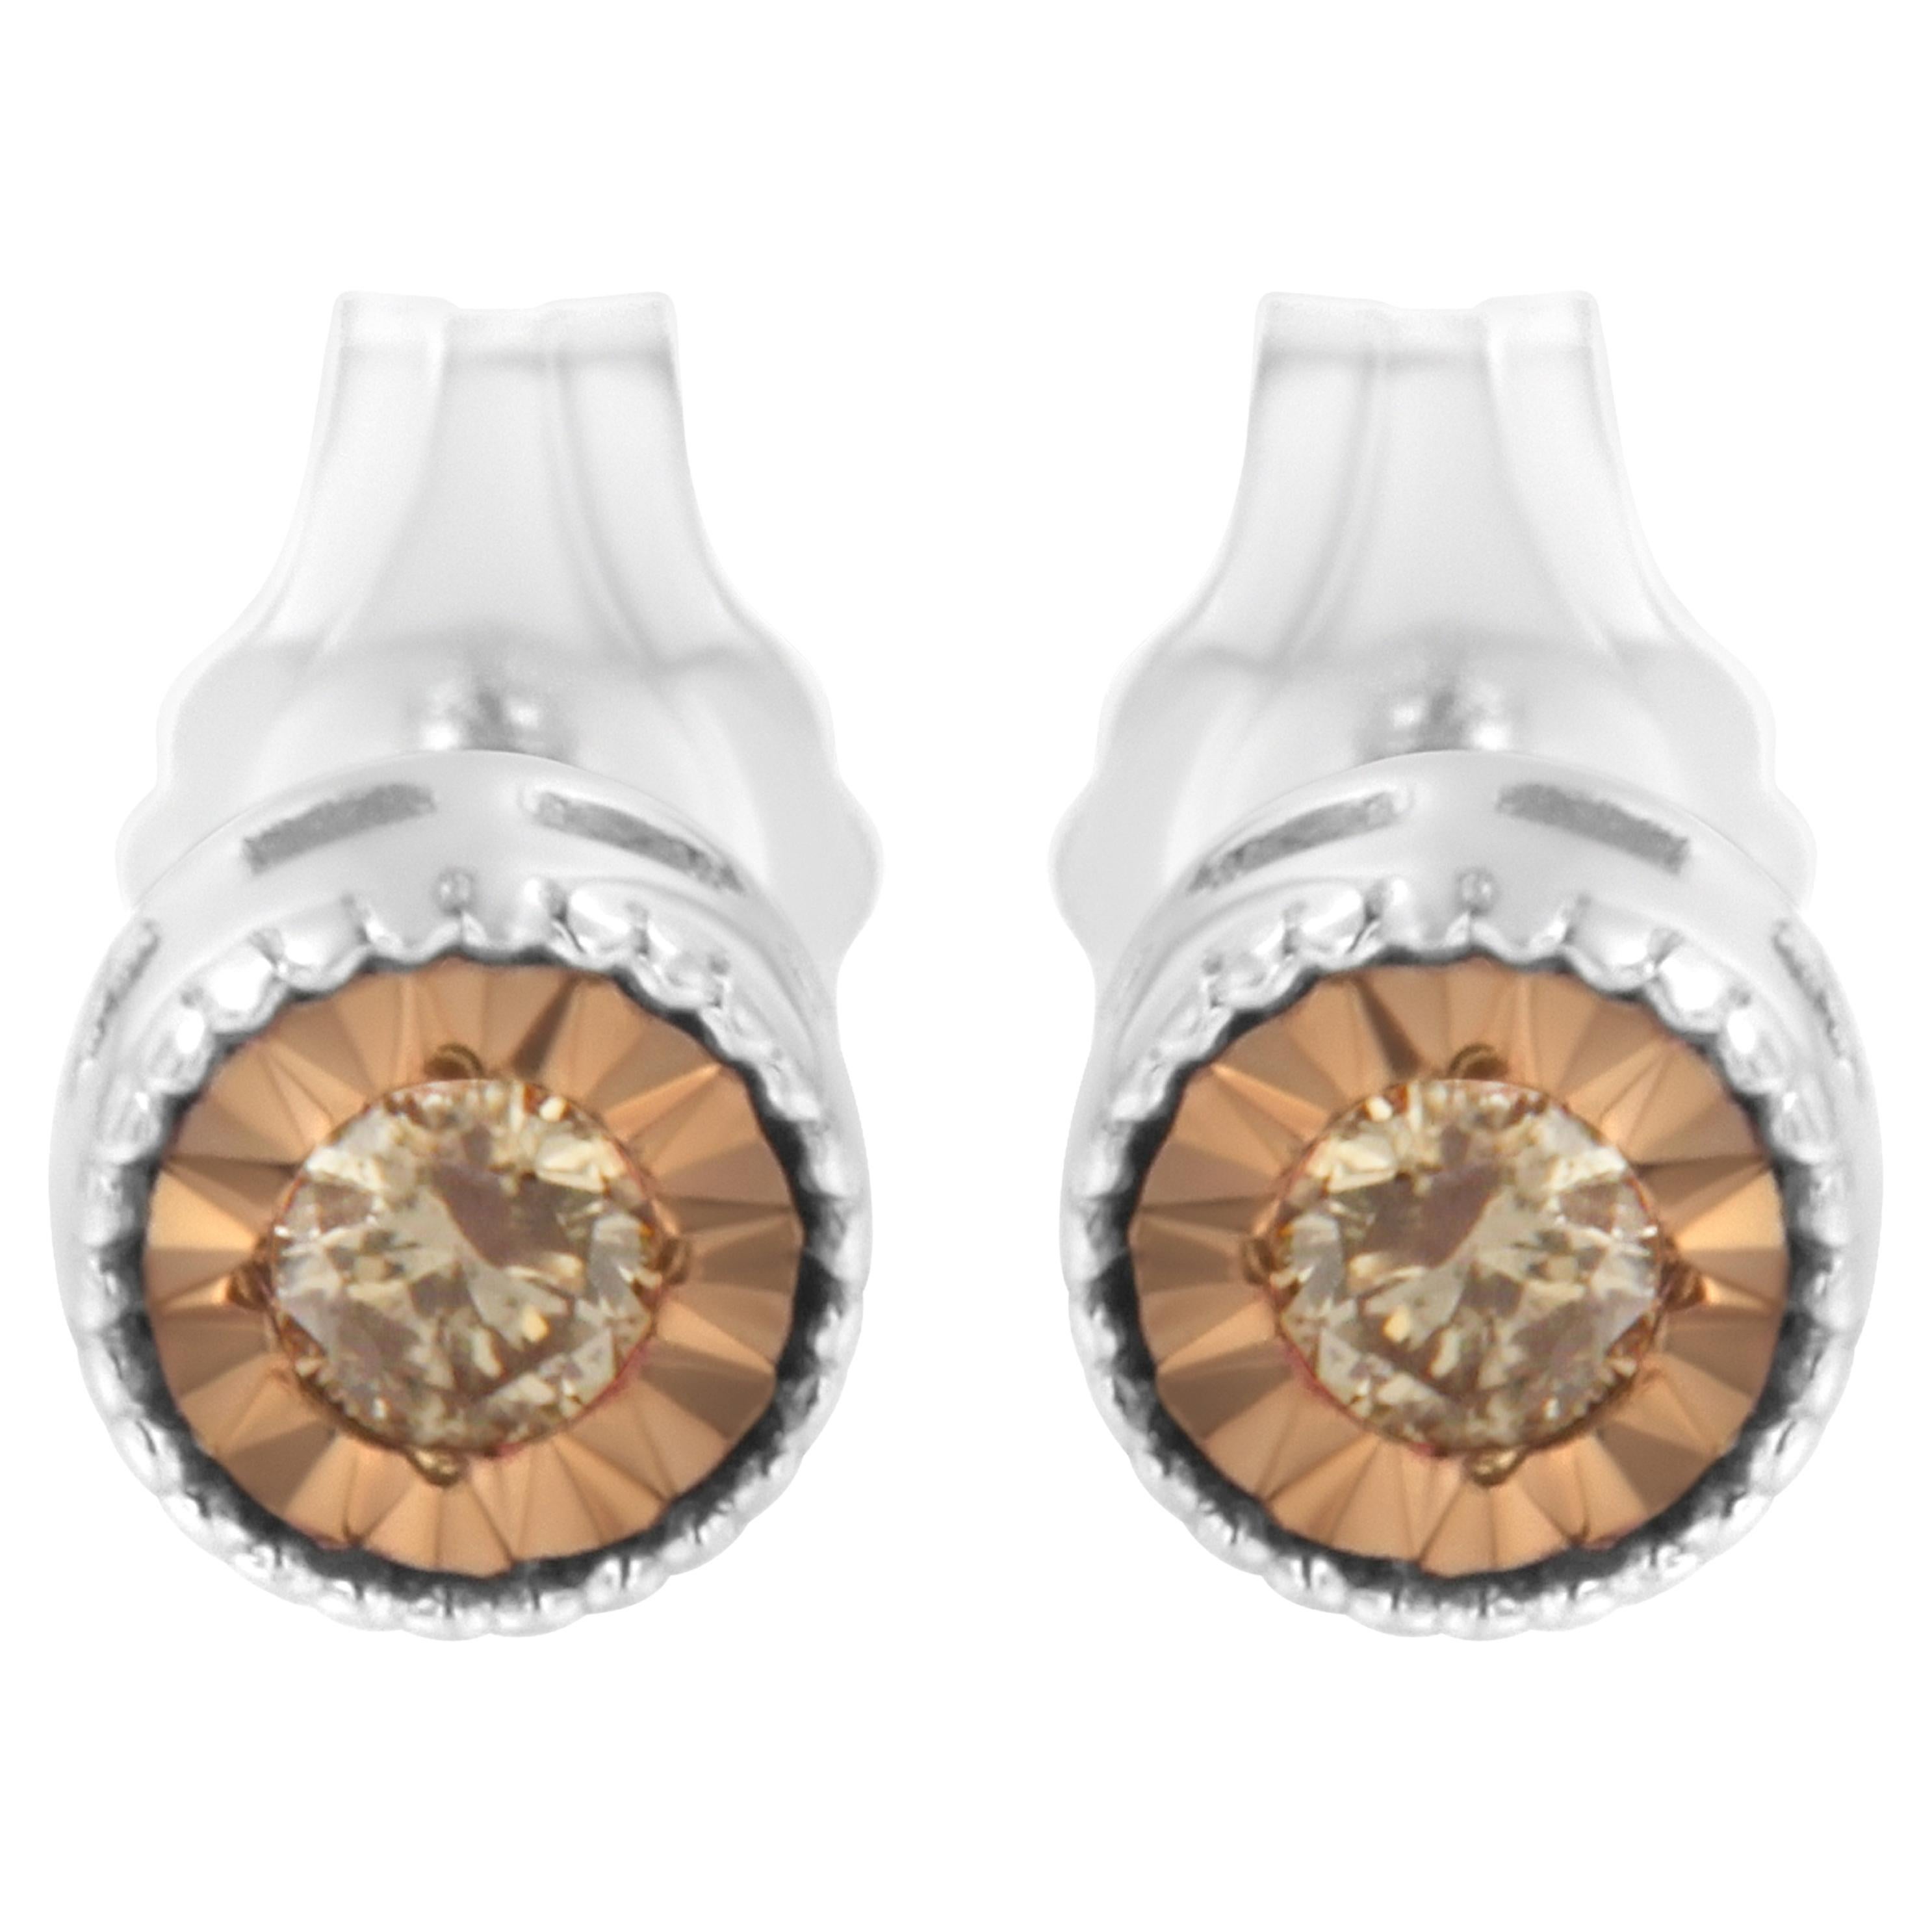 925 STERLING SILVER CHAMPAGNE STUD EARRINGS W/ 5 CT CHAMPAGNE DIAMOND/8MM 